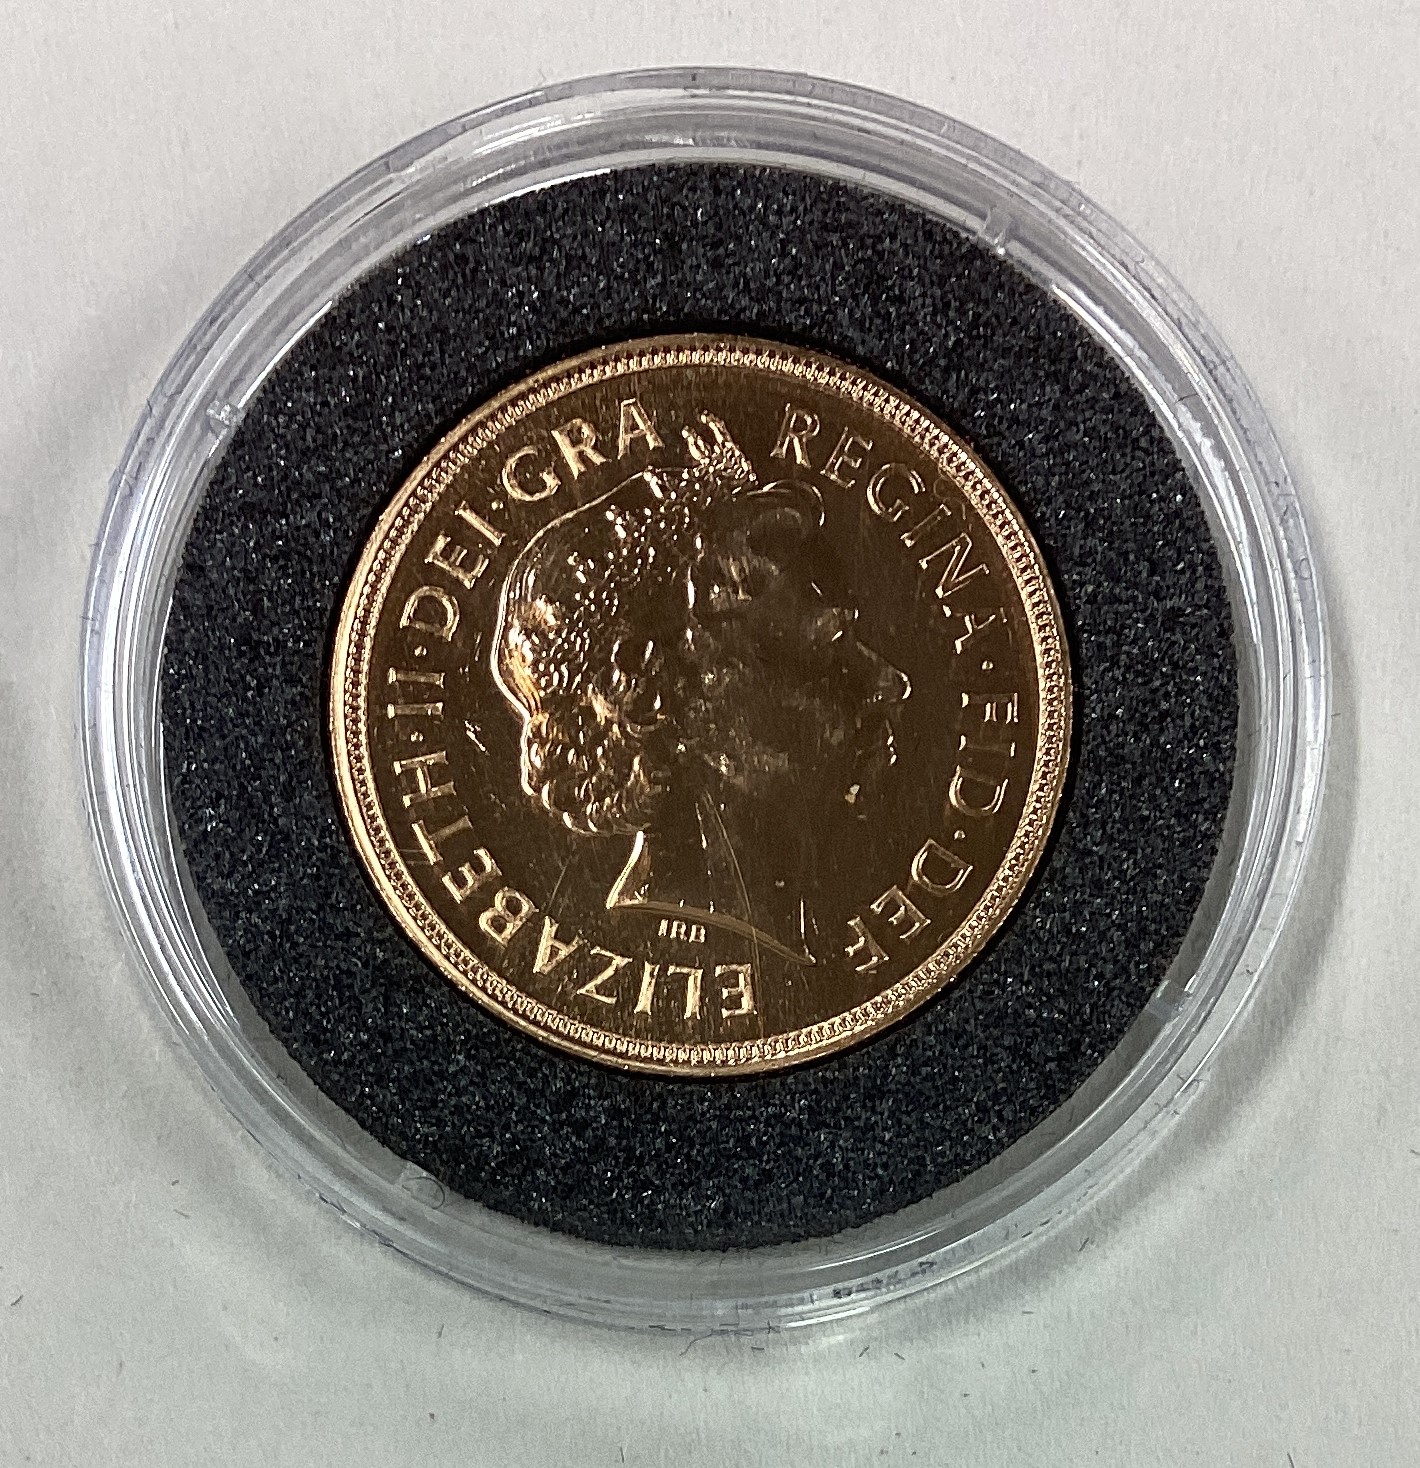 A 2005 gold Full Sovereign coin. - Image 2 of 2